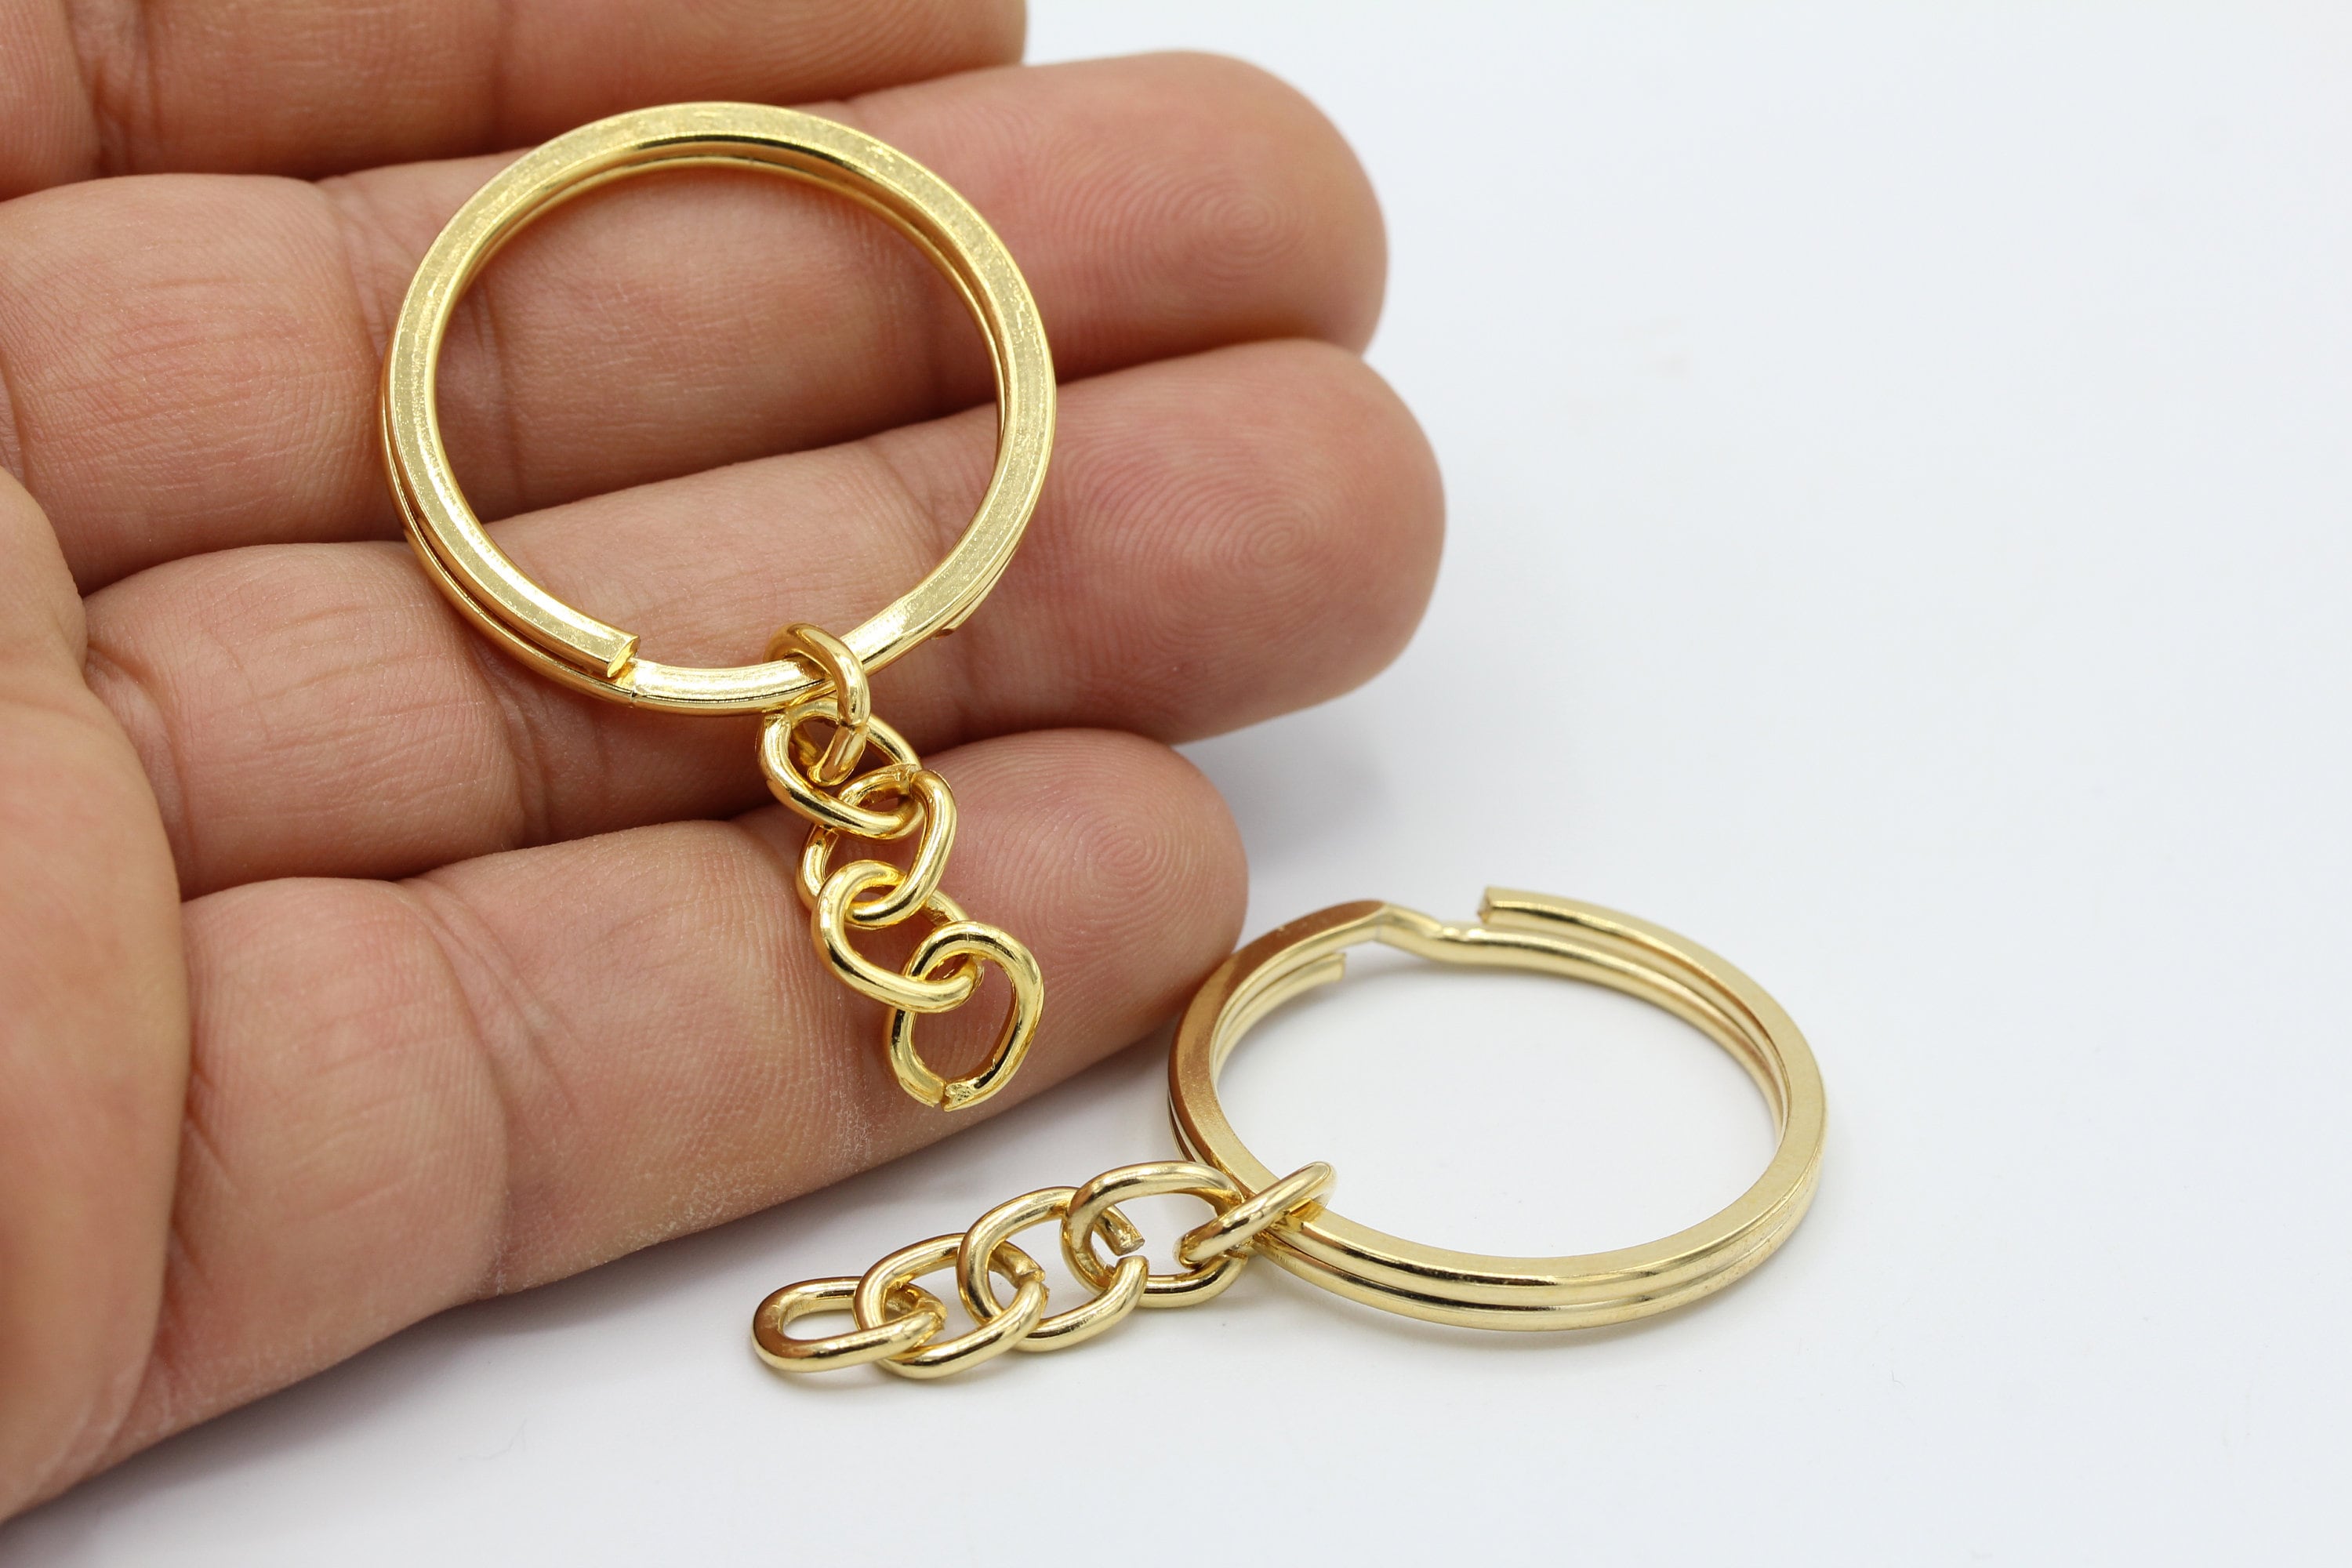 24mm gold or nickel plated split ring/ key ring/ key chain rings, 500 – My  Supplies Source